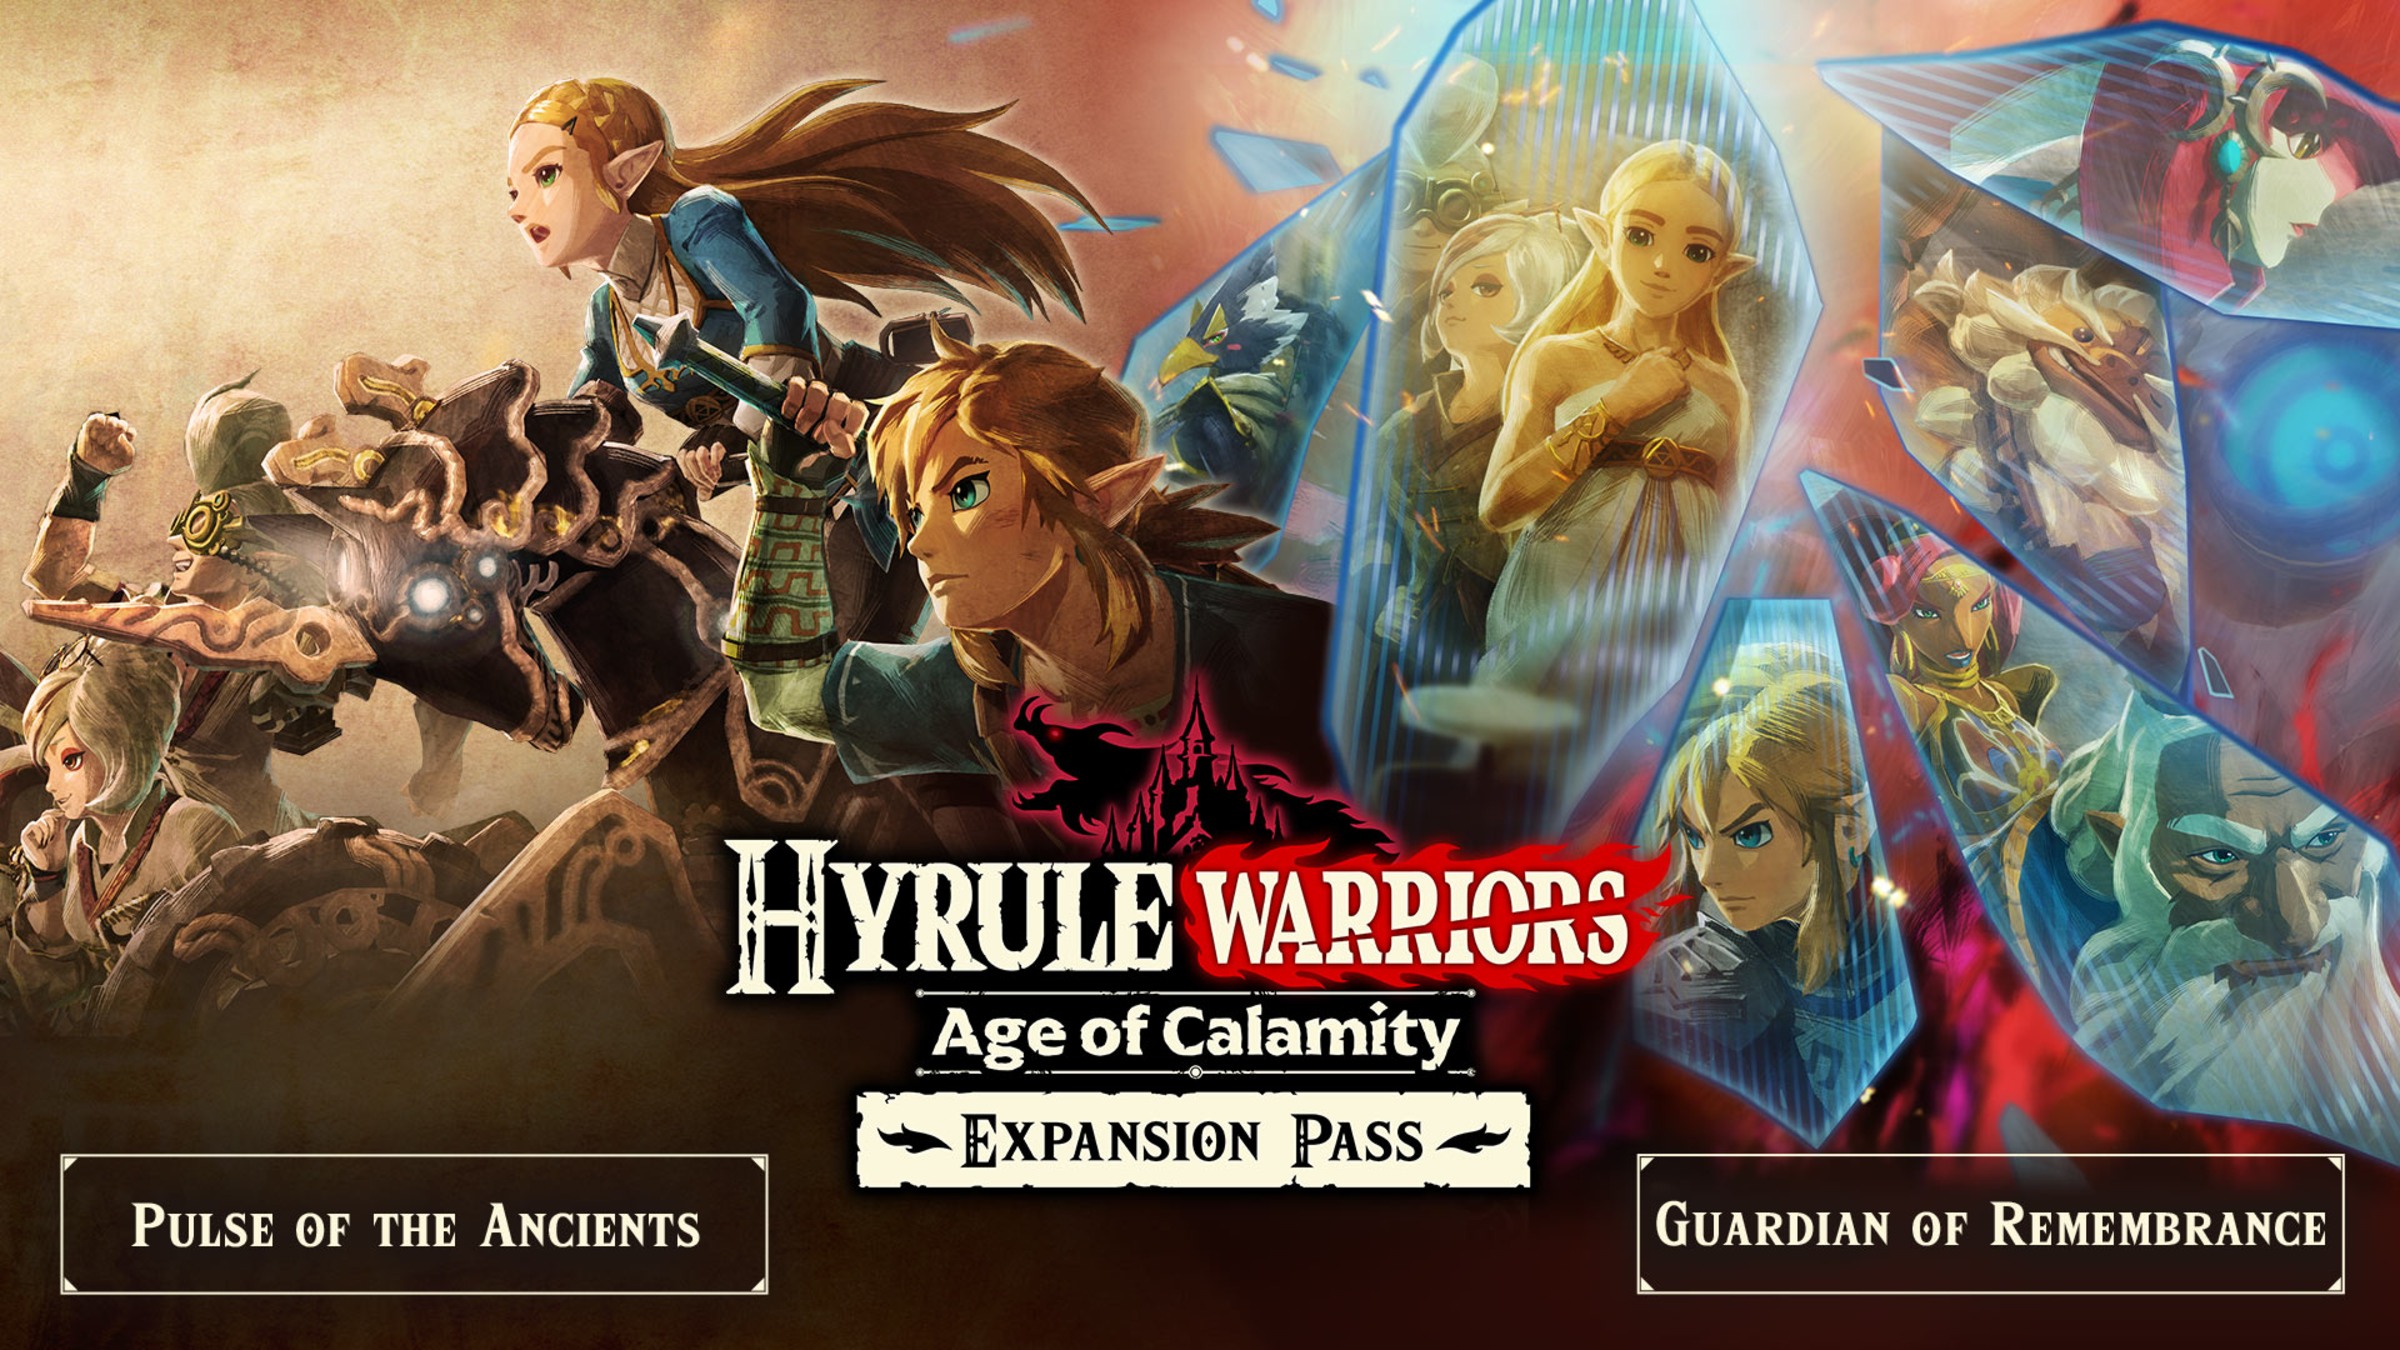 Site Nintendo Expansion Nintendo Calamity Pass Age Hyrule for Warriors: Switch Official of -